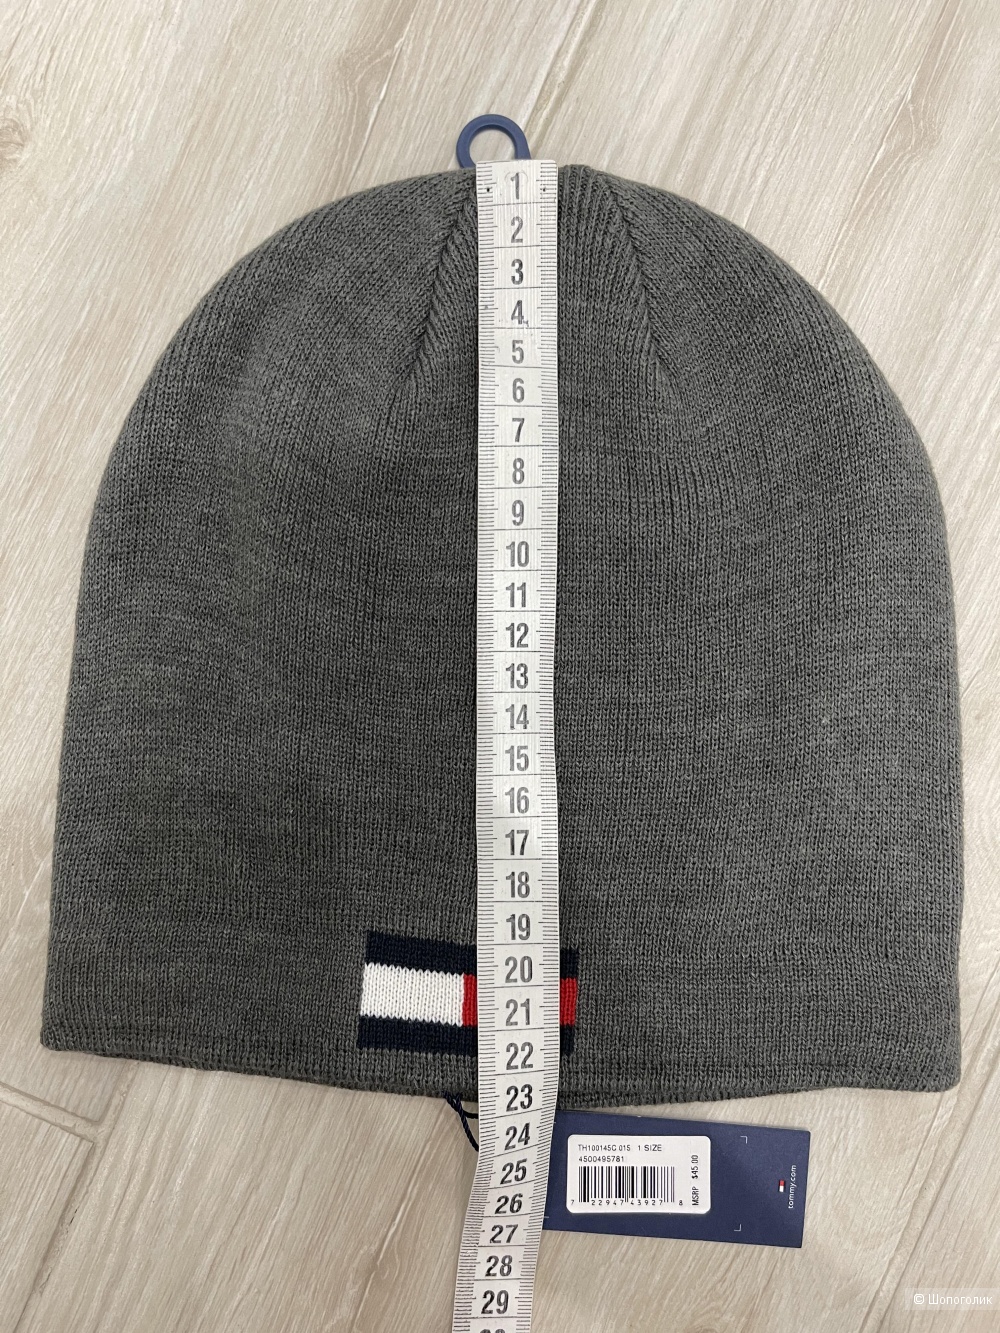 Шапка Tommy Hilfiger размер one size